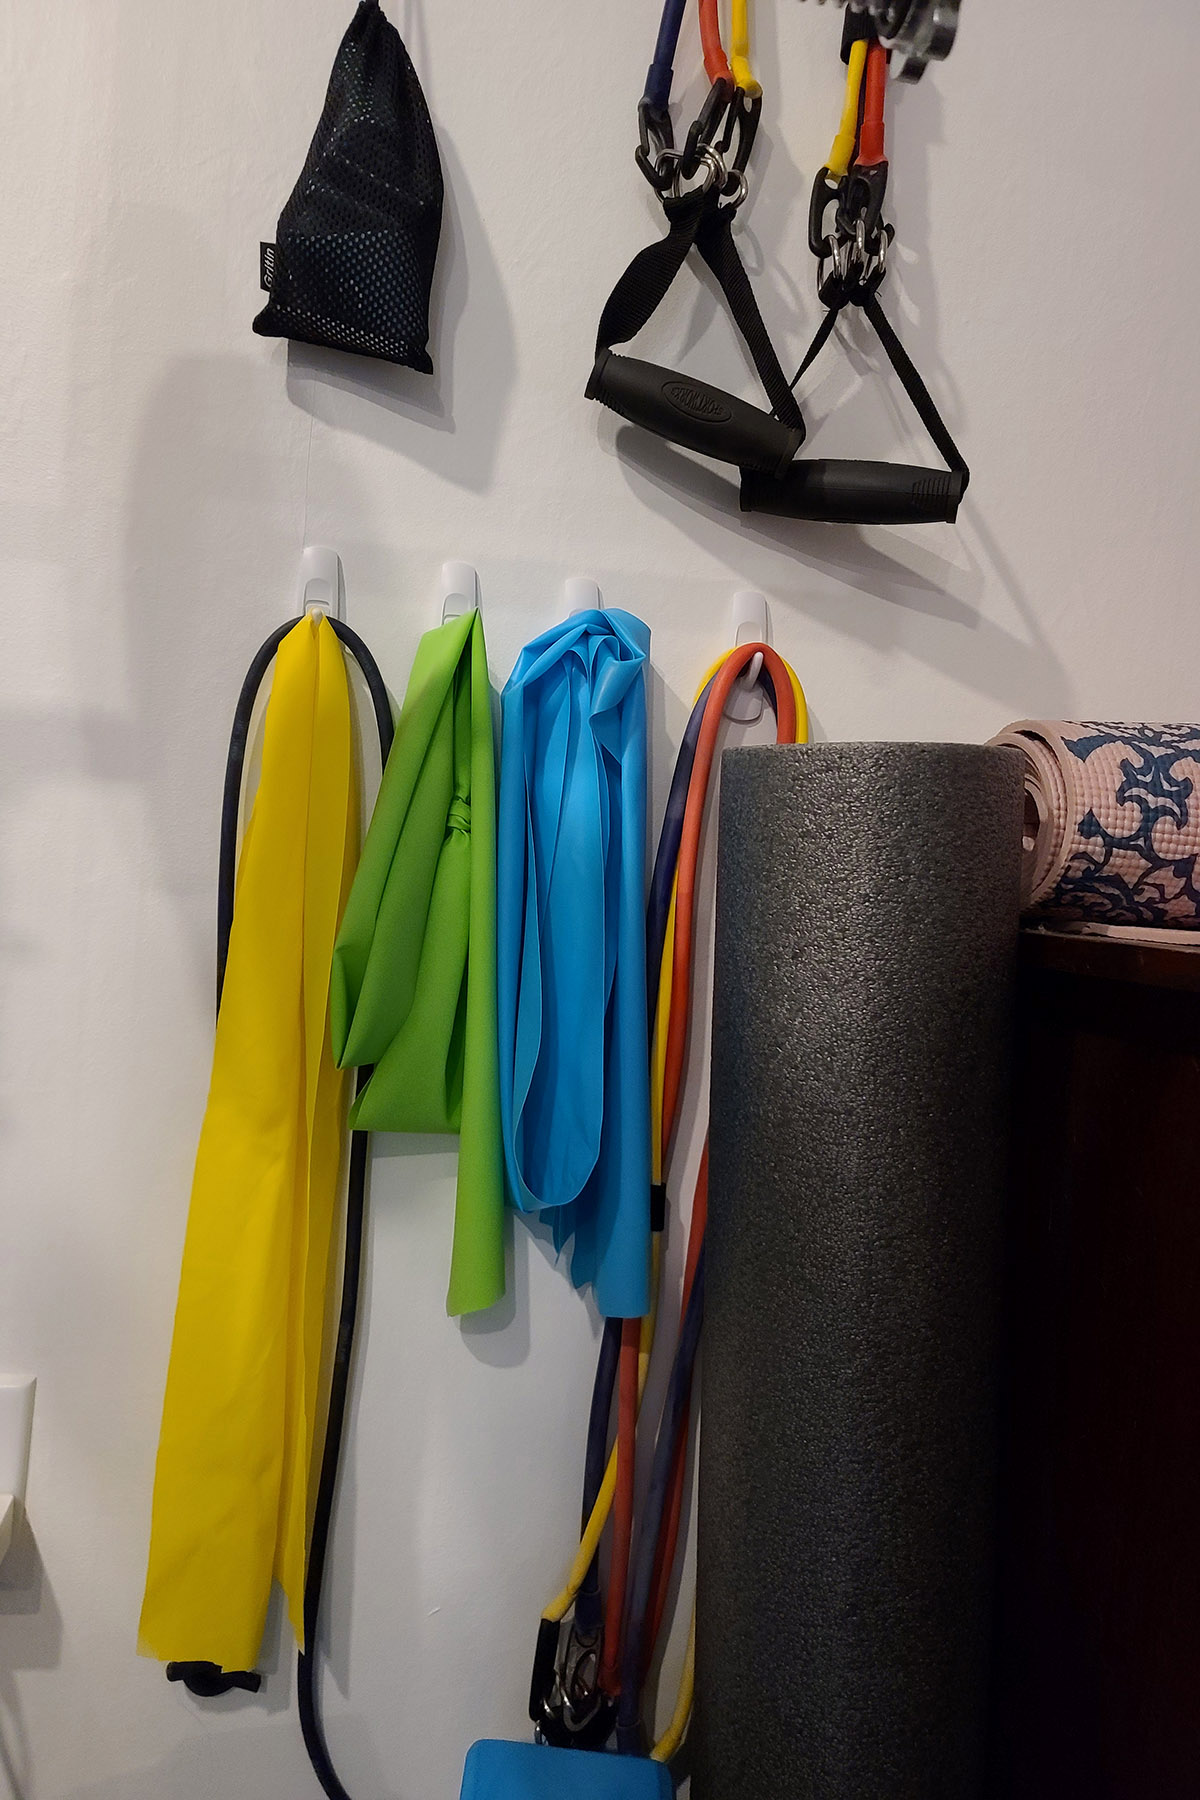 Several yoga therapy bands hanging from hooks on a wall.